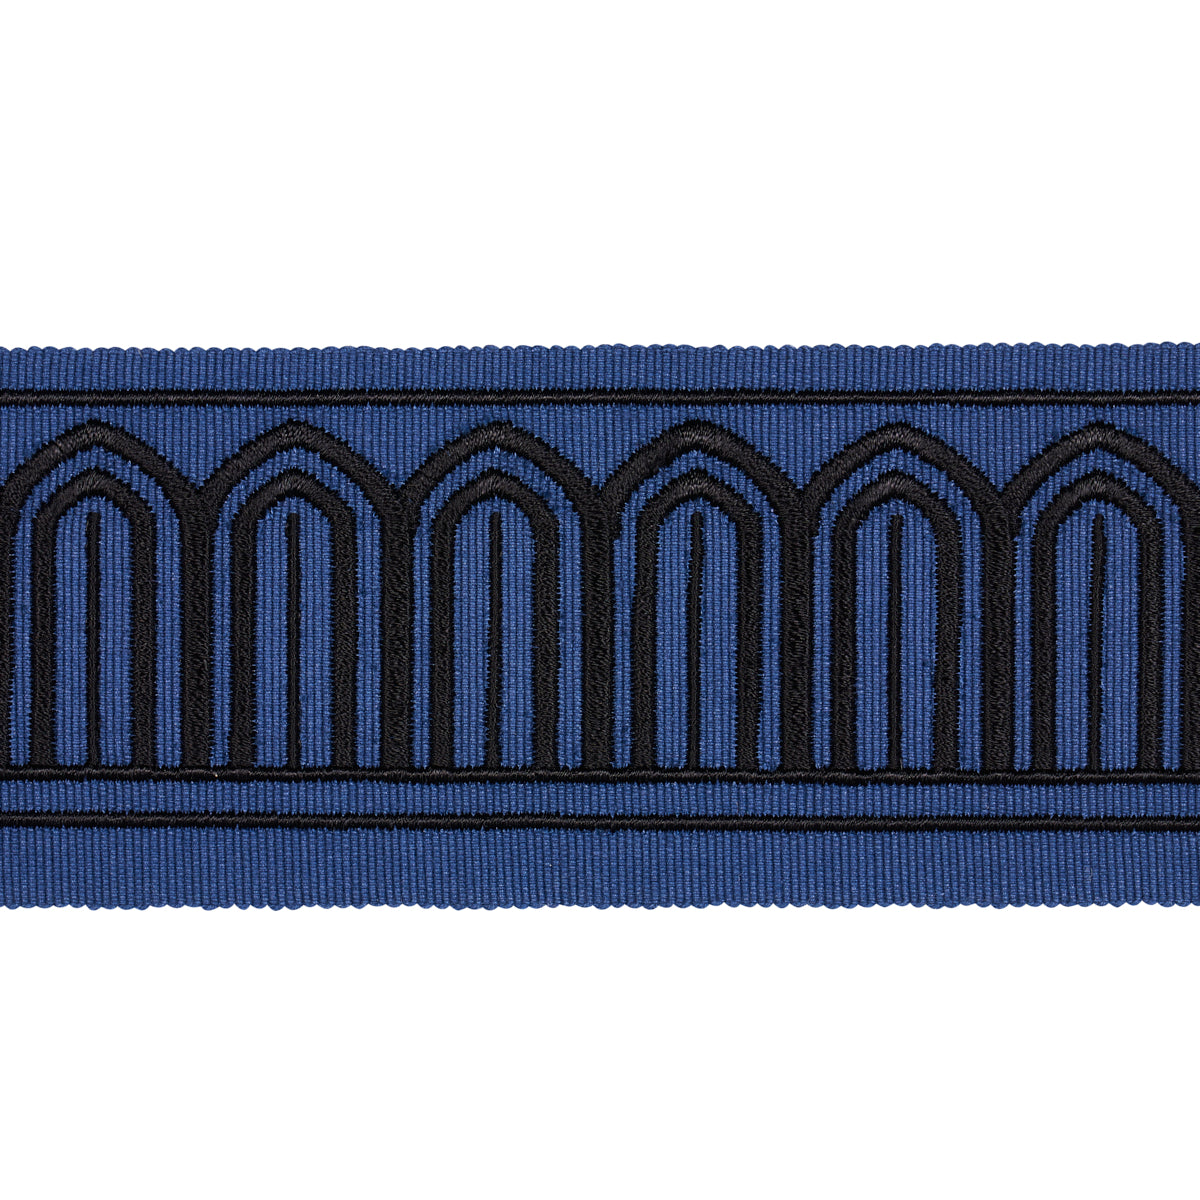 ARCHES EMBROIDERED TAPE MEDIUM | BLACK ON NAVY